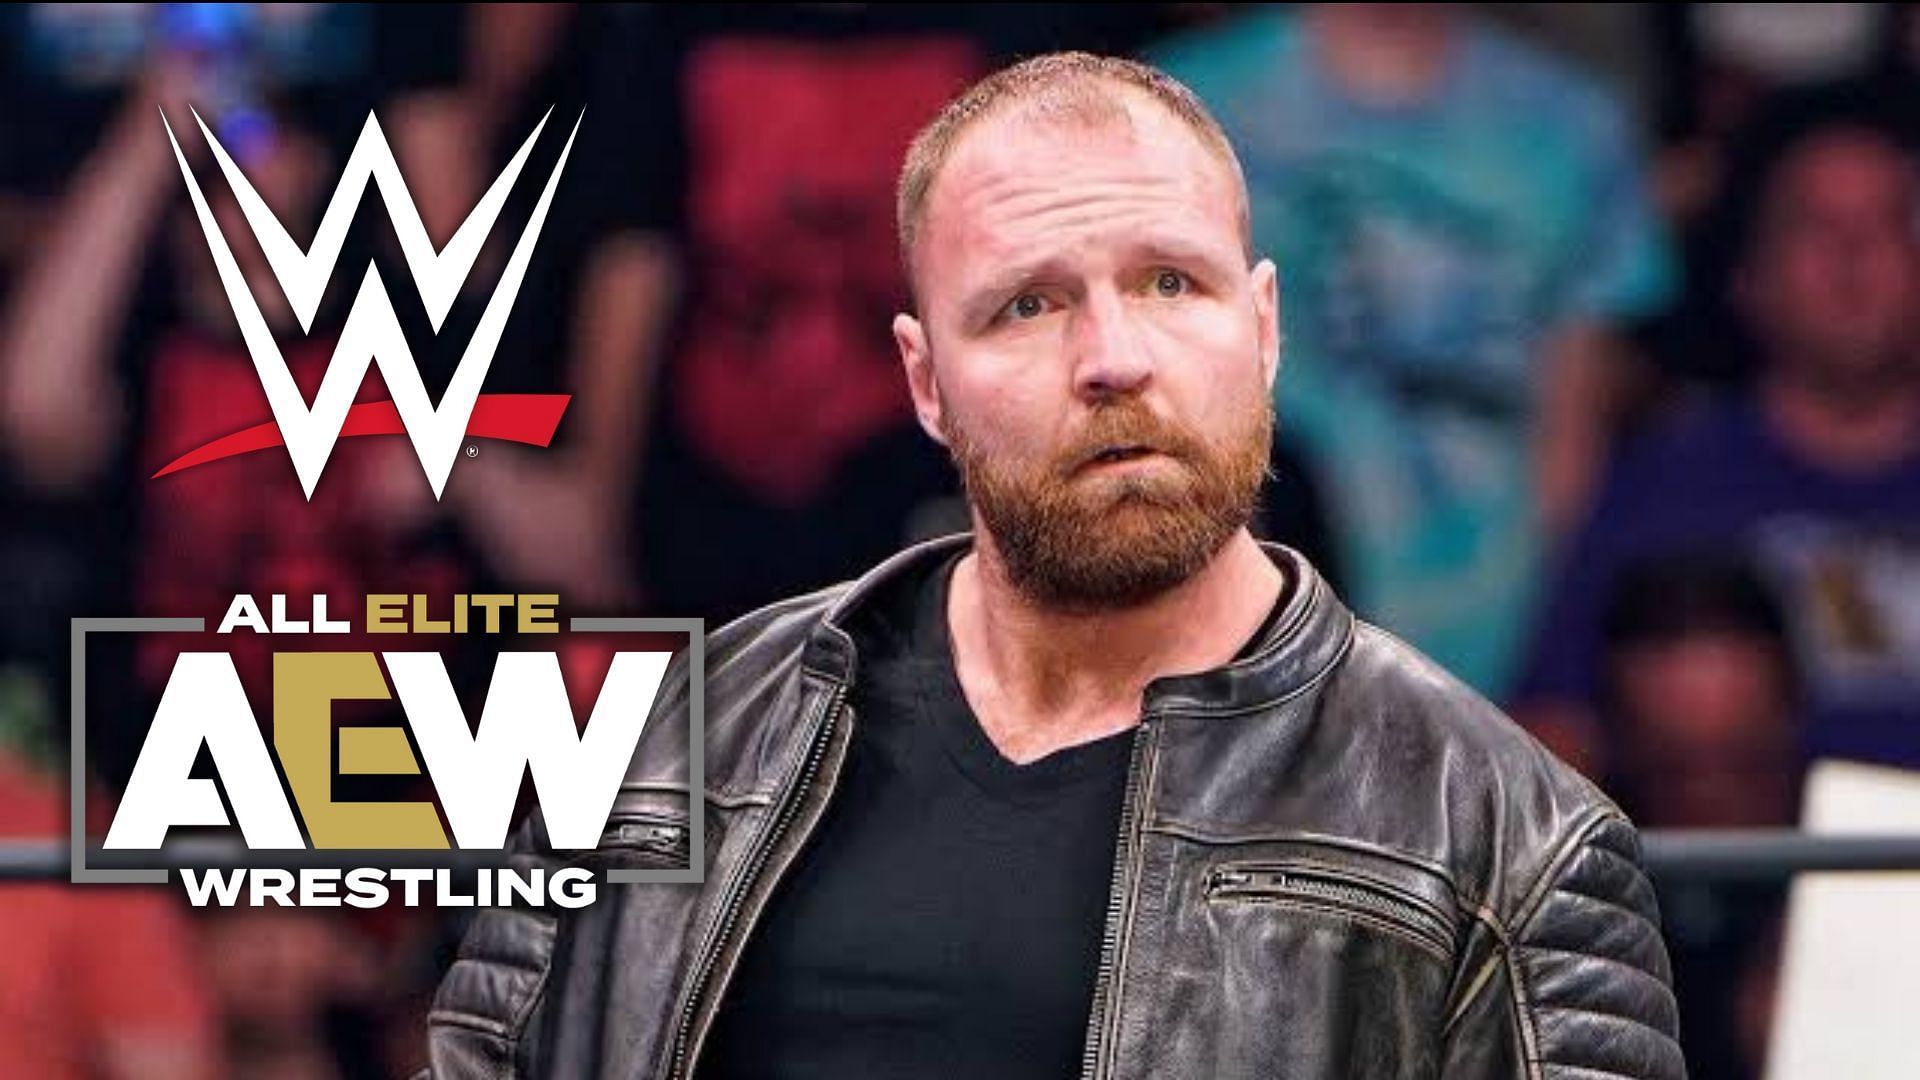 Jon Moxley is a former AEW Champion.